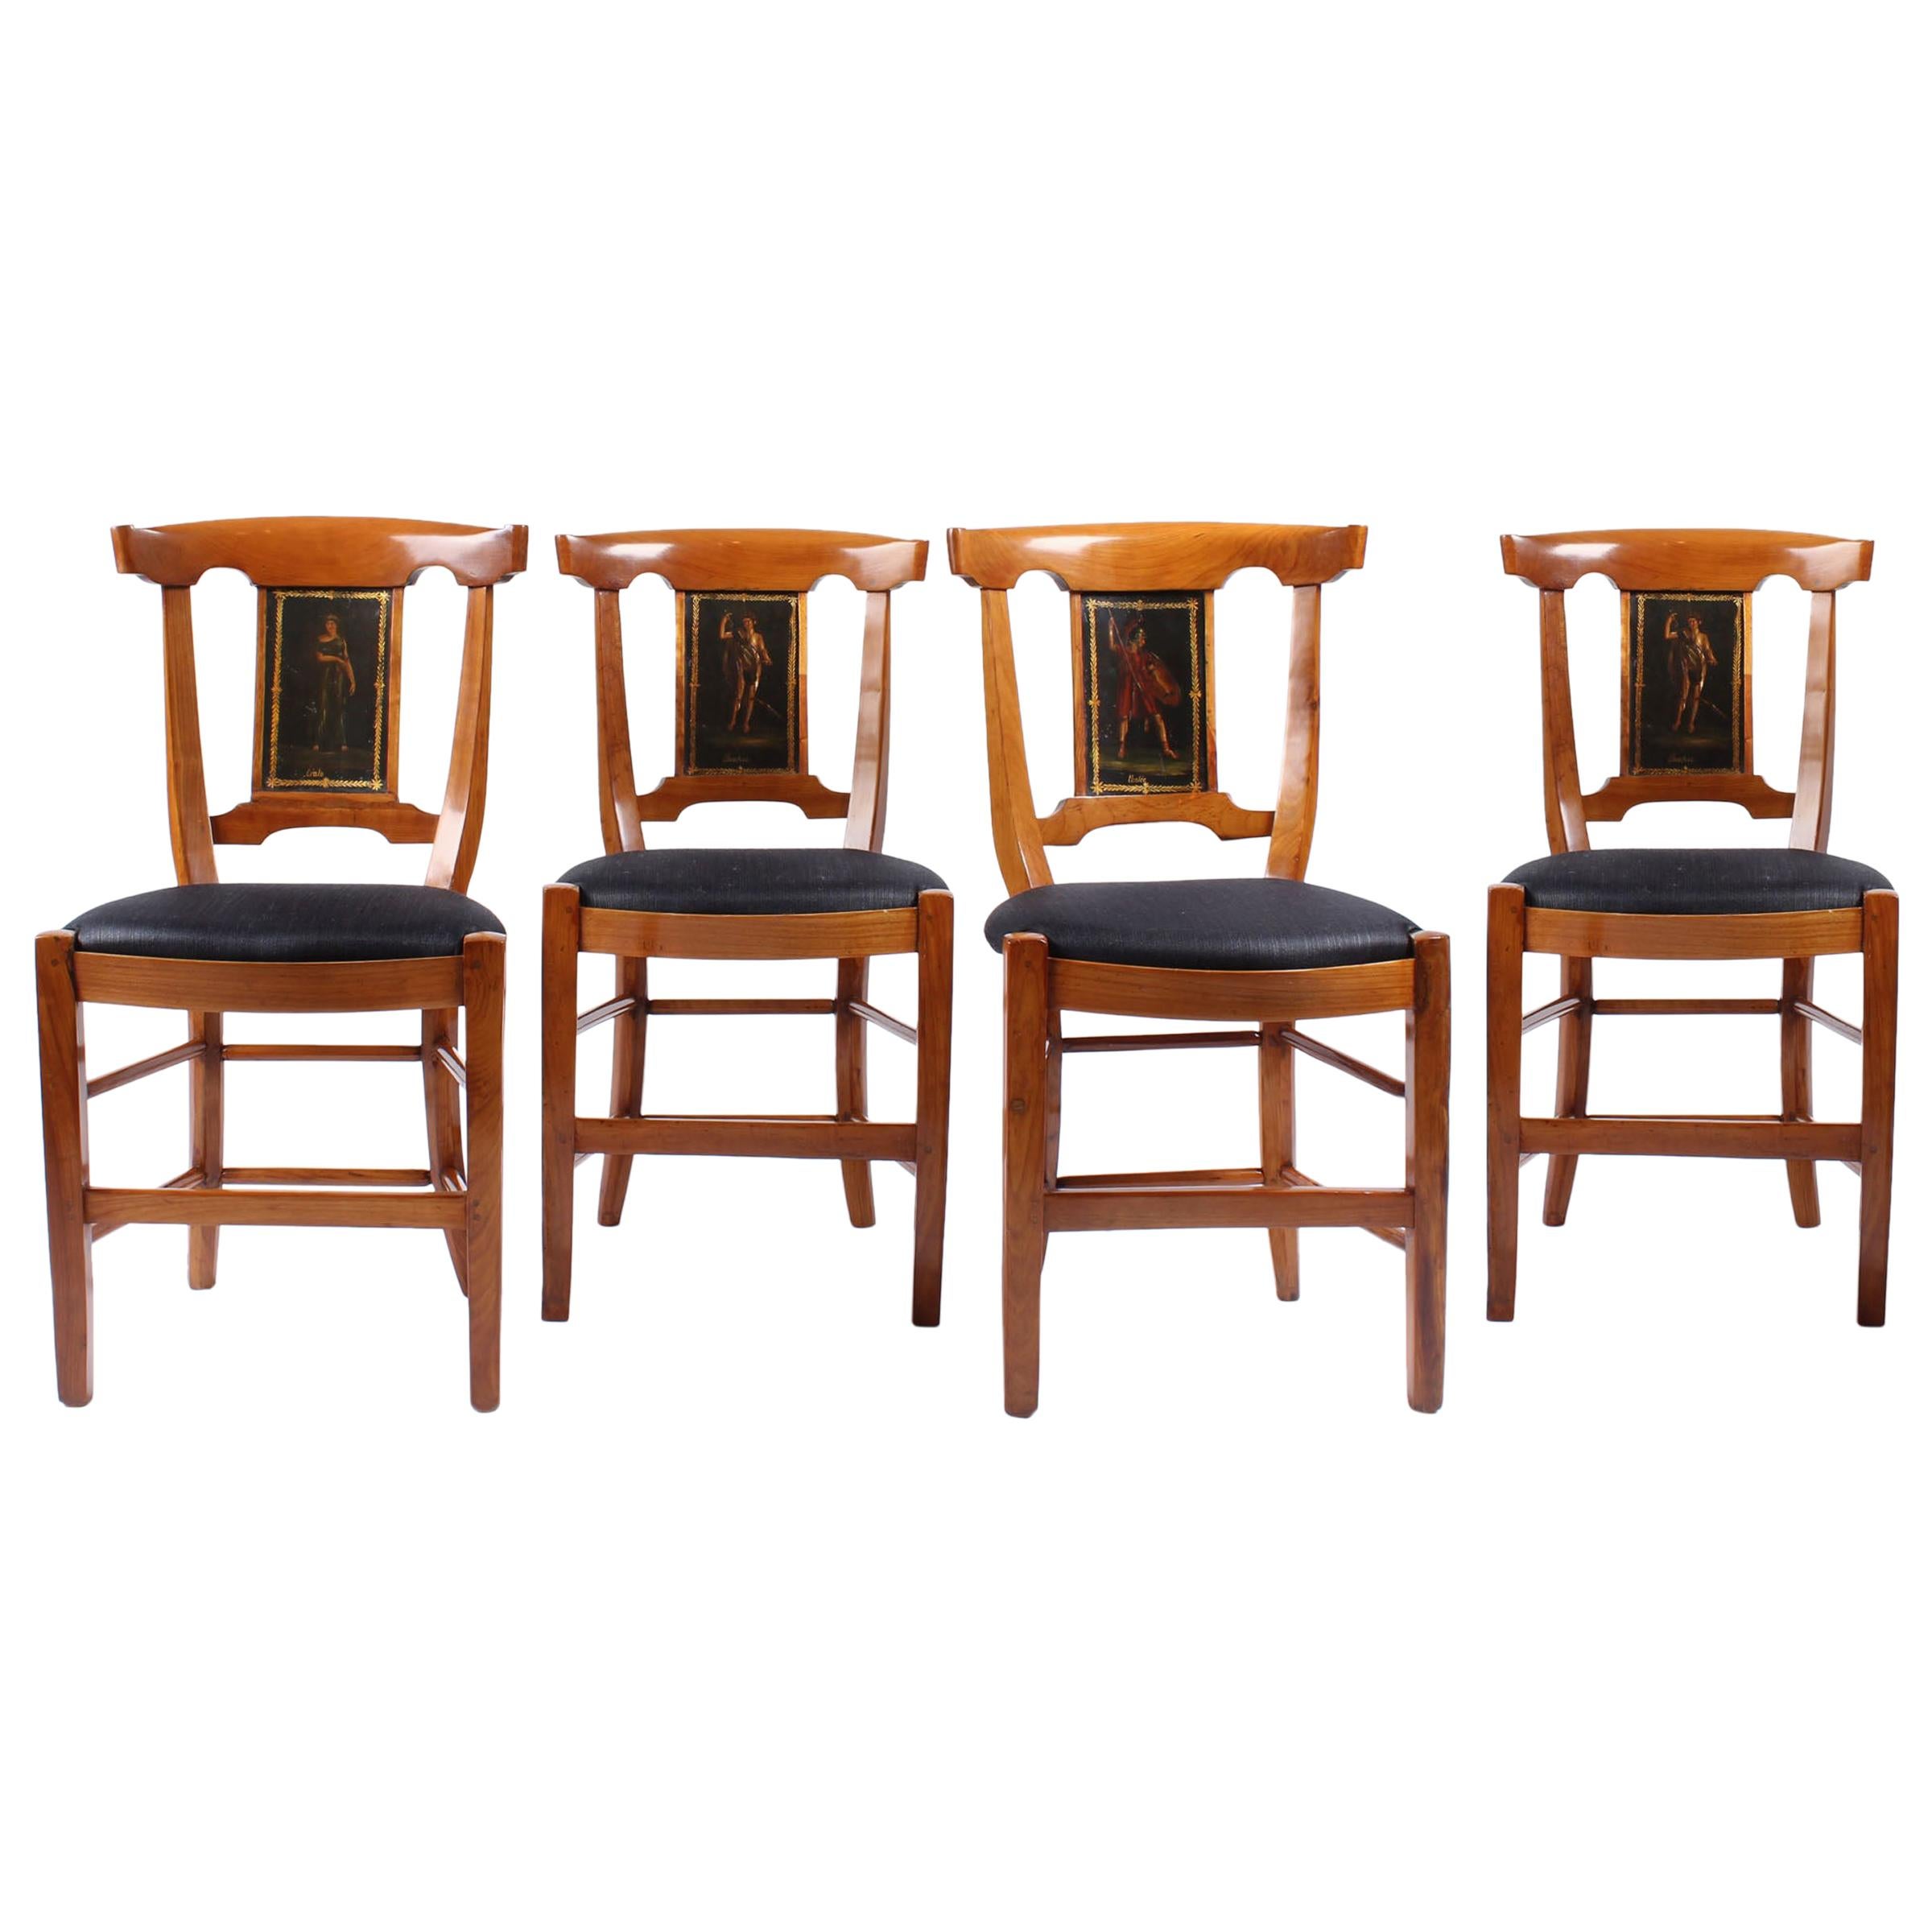 Set of Four 18th Century Chairs, France, Cherry, Painted, Directoire, circa 1800 For Sale